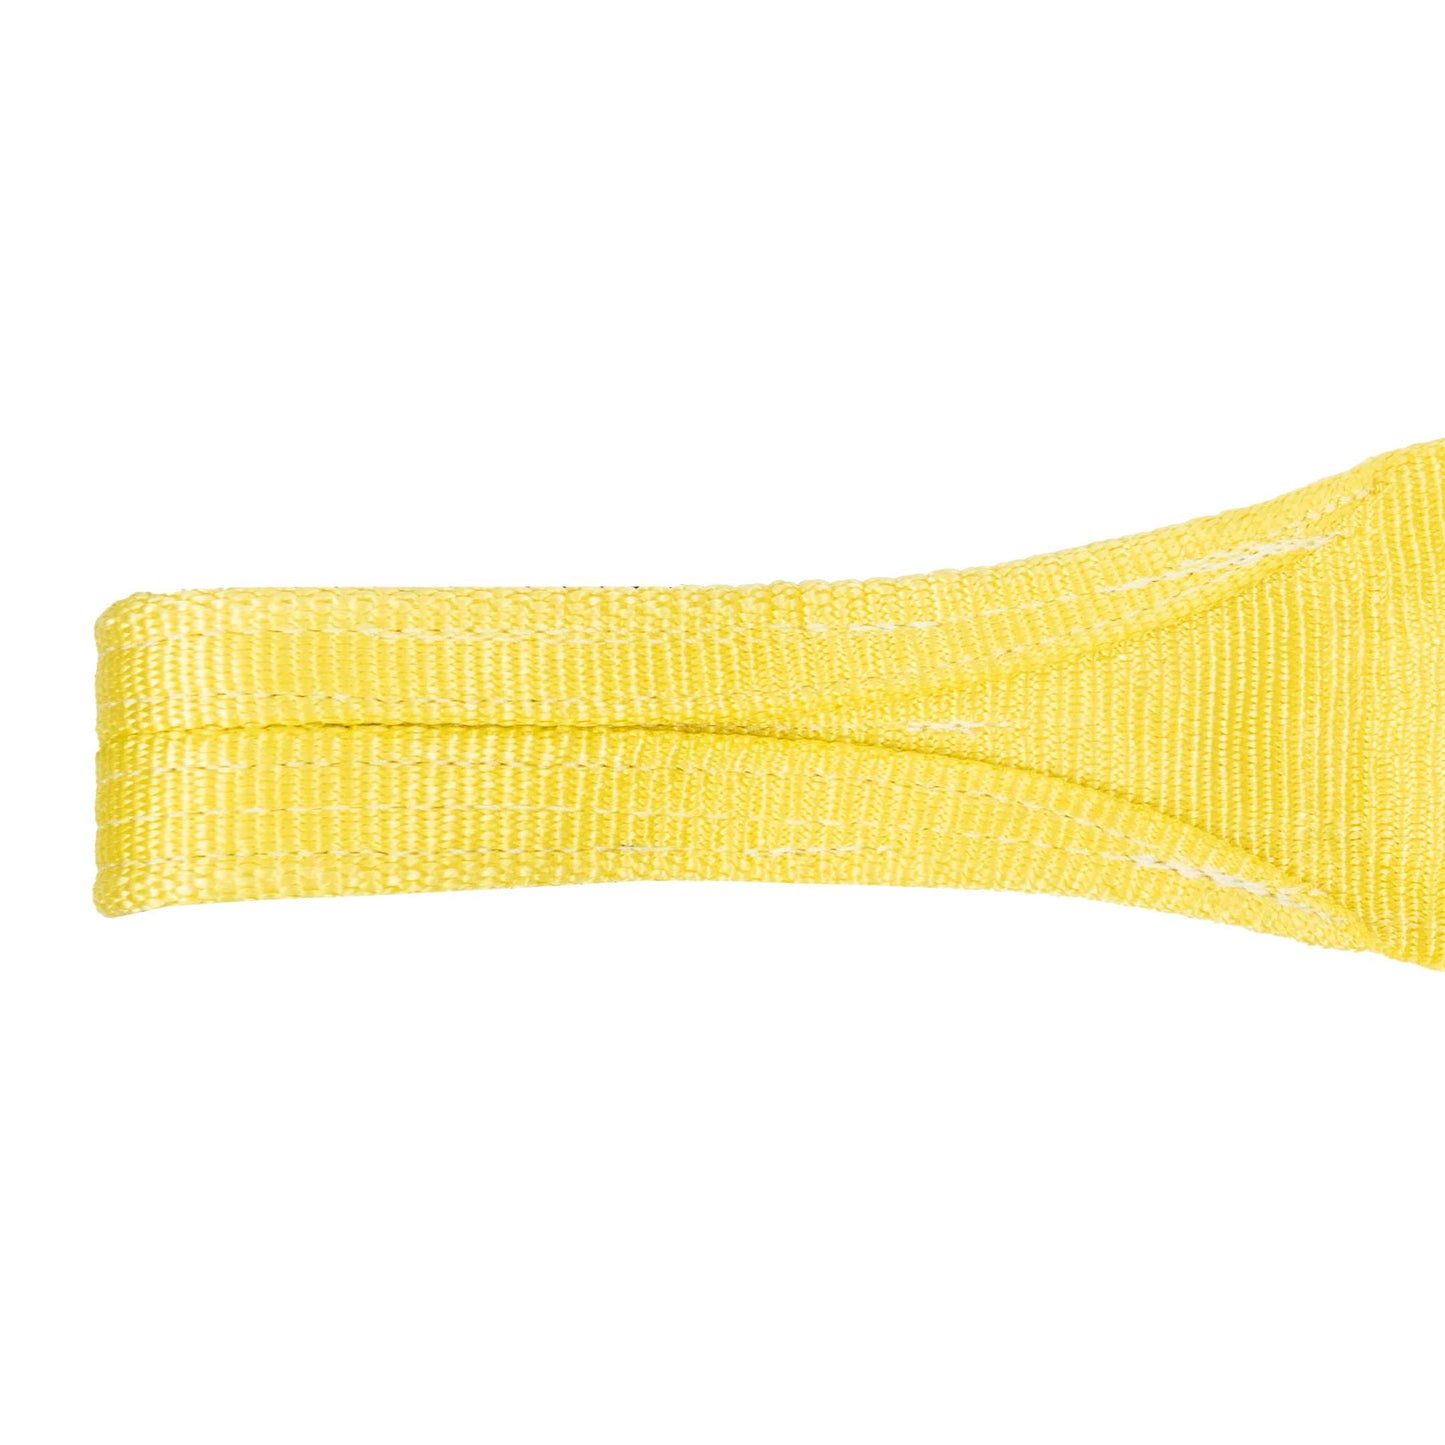 6" x 30' Heavy Duty Recovery Strap with Reinforced Cordura Eyes - 2 Ply | 40,000 WLL